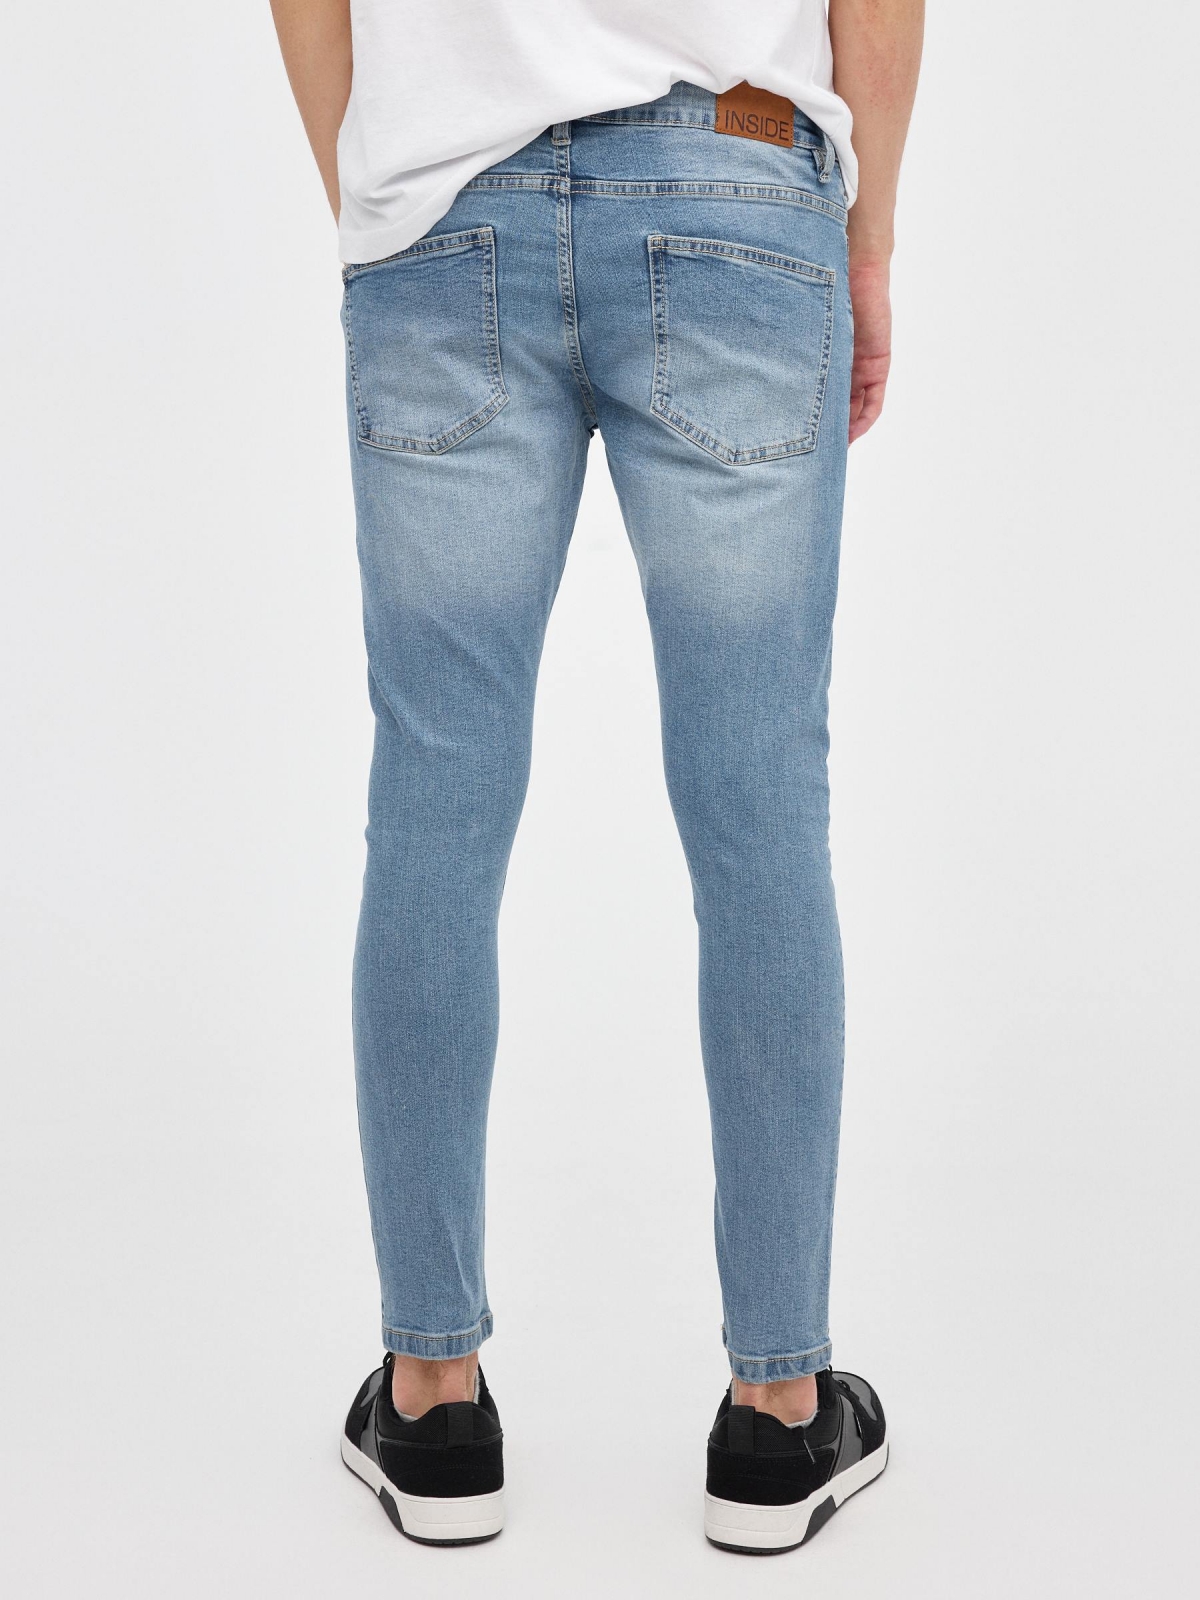 Ripped denim skinny jeans blue middle back view